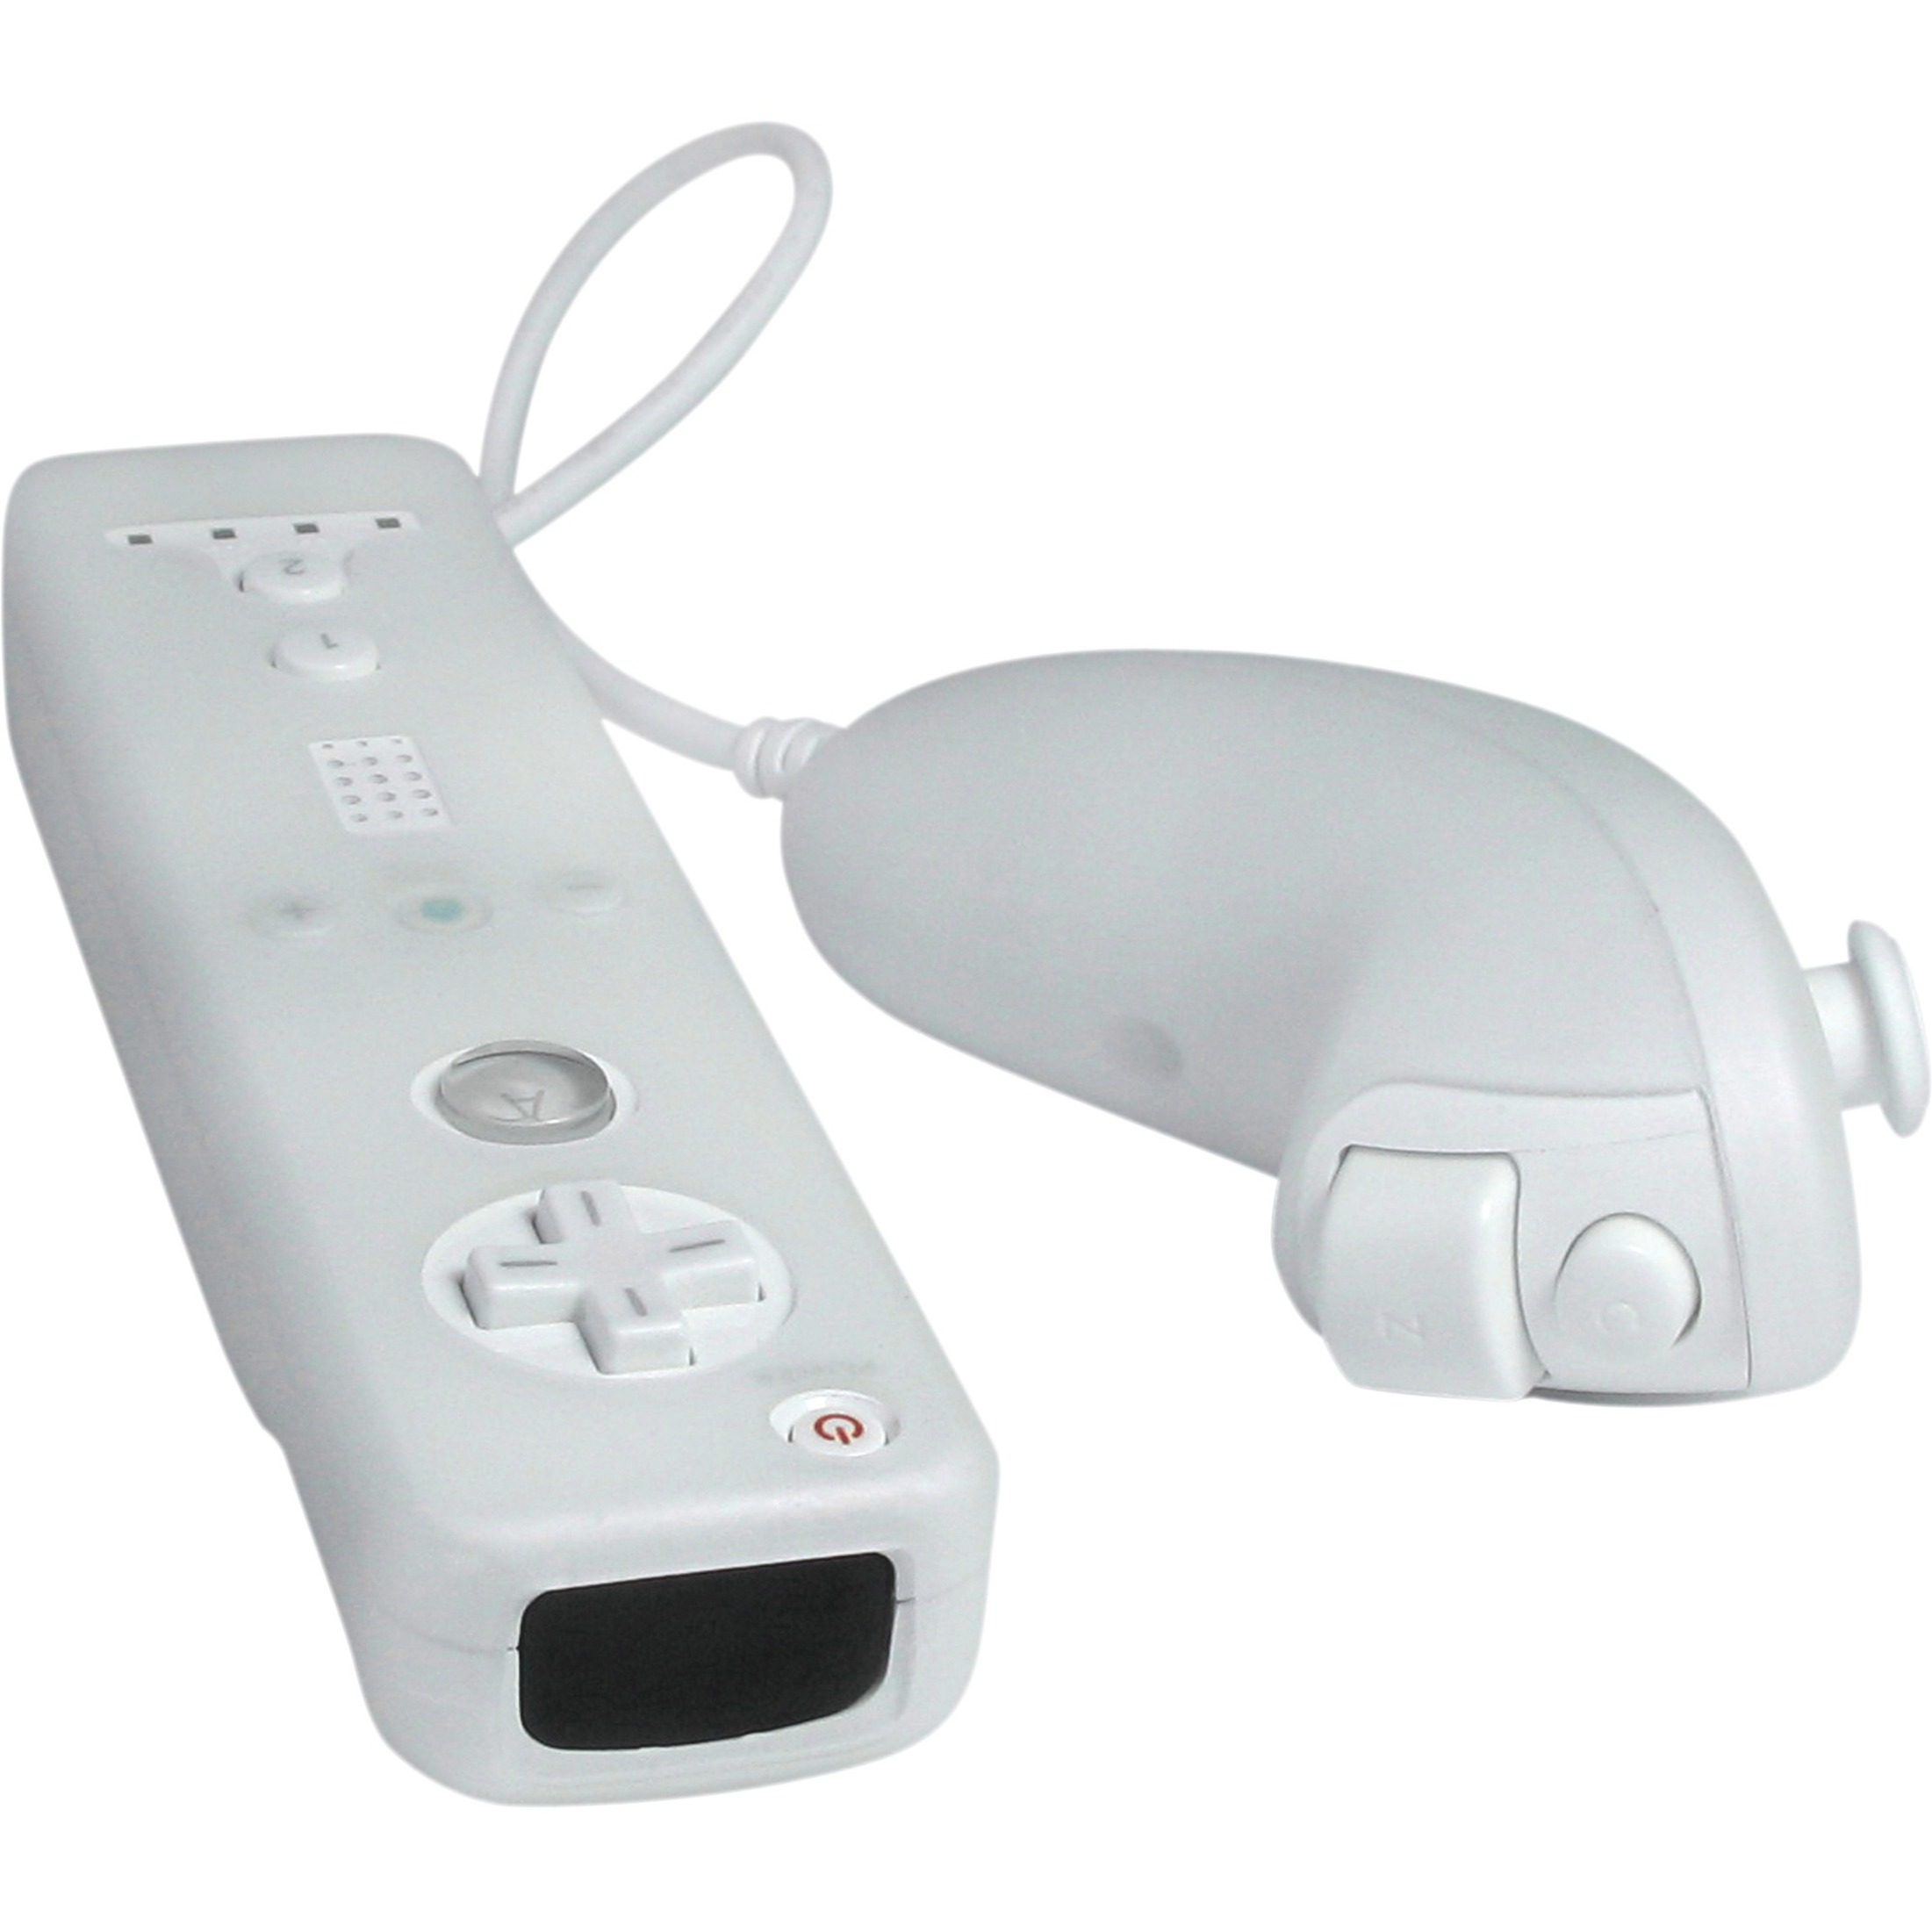 CTA Digital Clear Silicon Sleeve for Wii - image 1 of 2